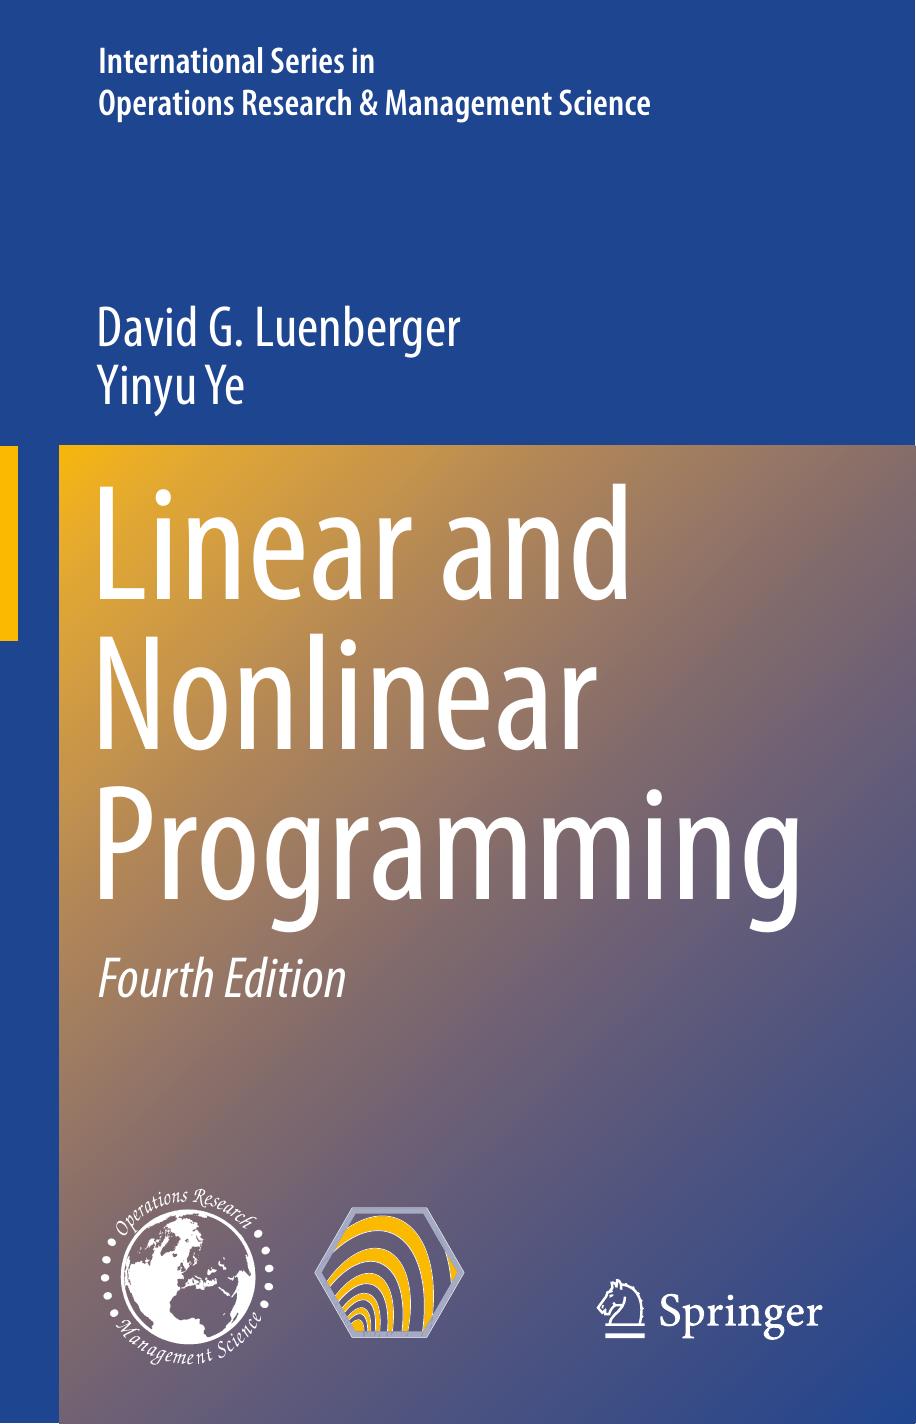 Linear and Nonlinear Programming by David G. Luenberger & Yinyu Ye